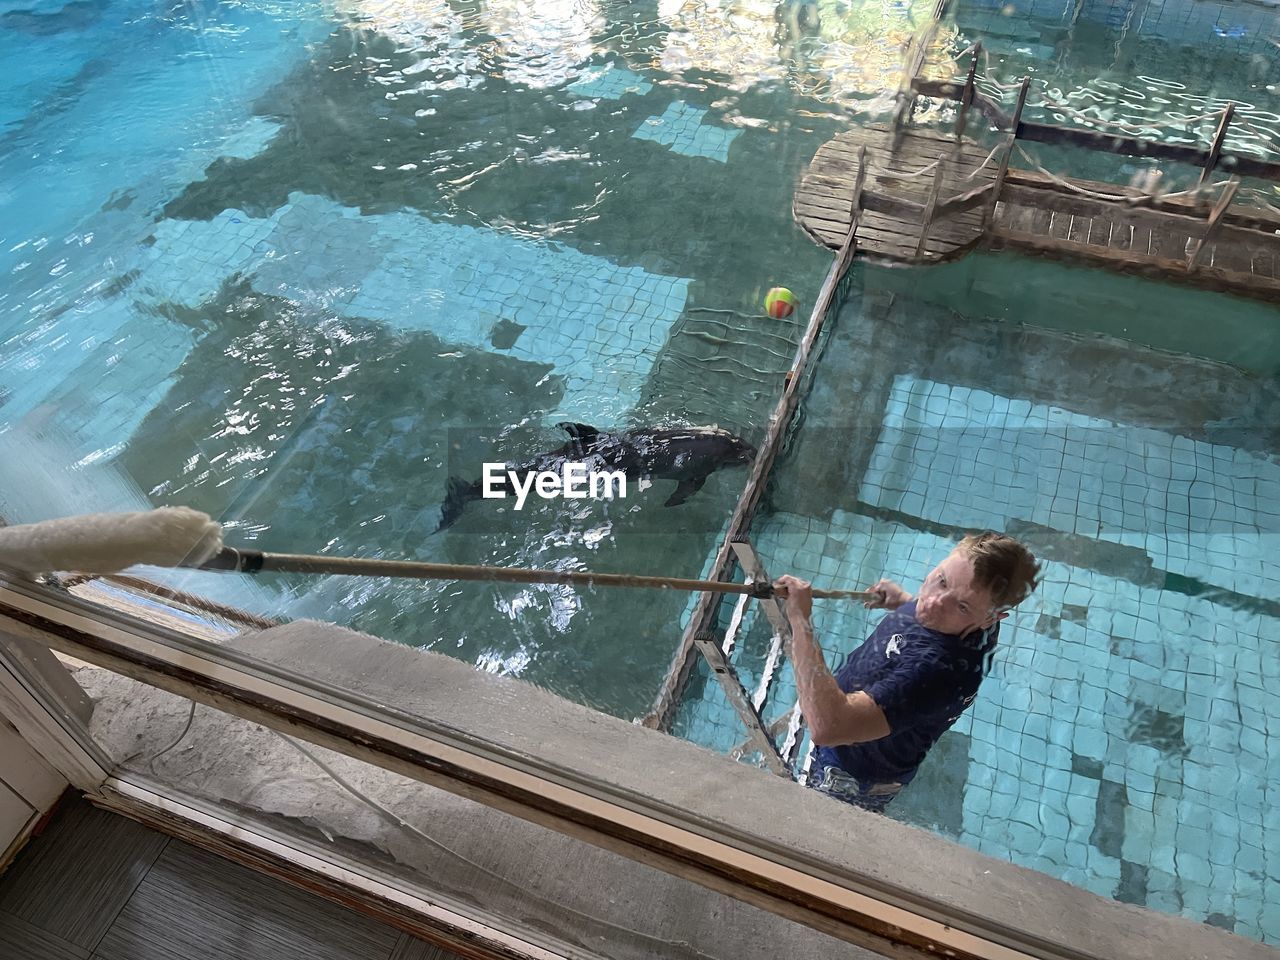 HIGH ANGLE VIEW OF SHIRTLESS MAN SWIMMING IN POOL